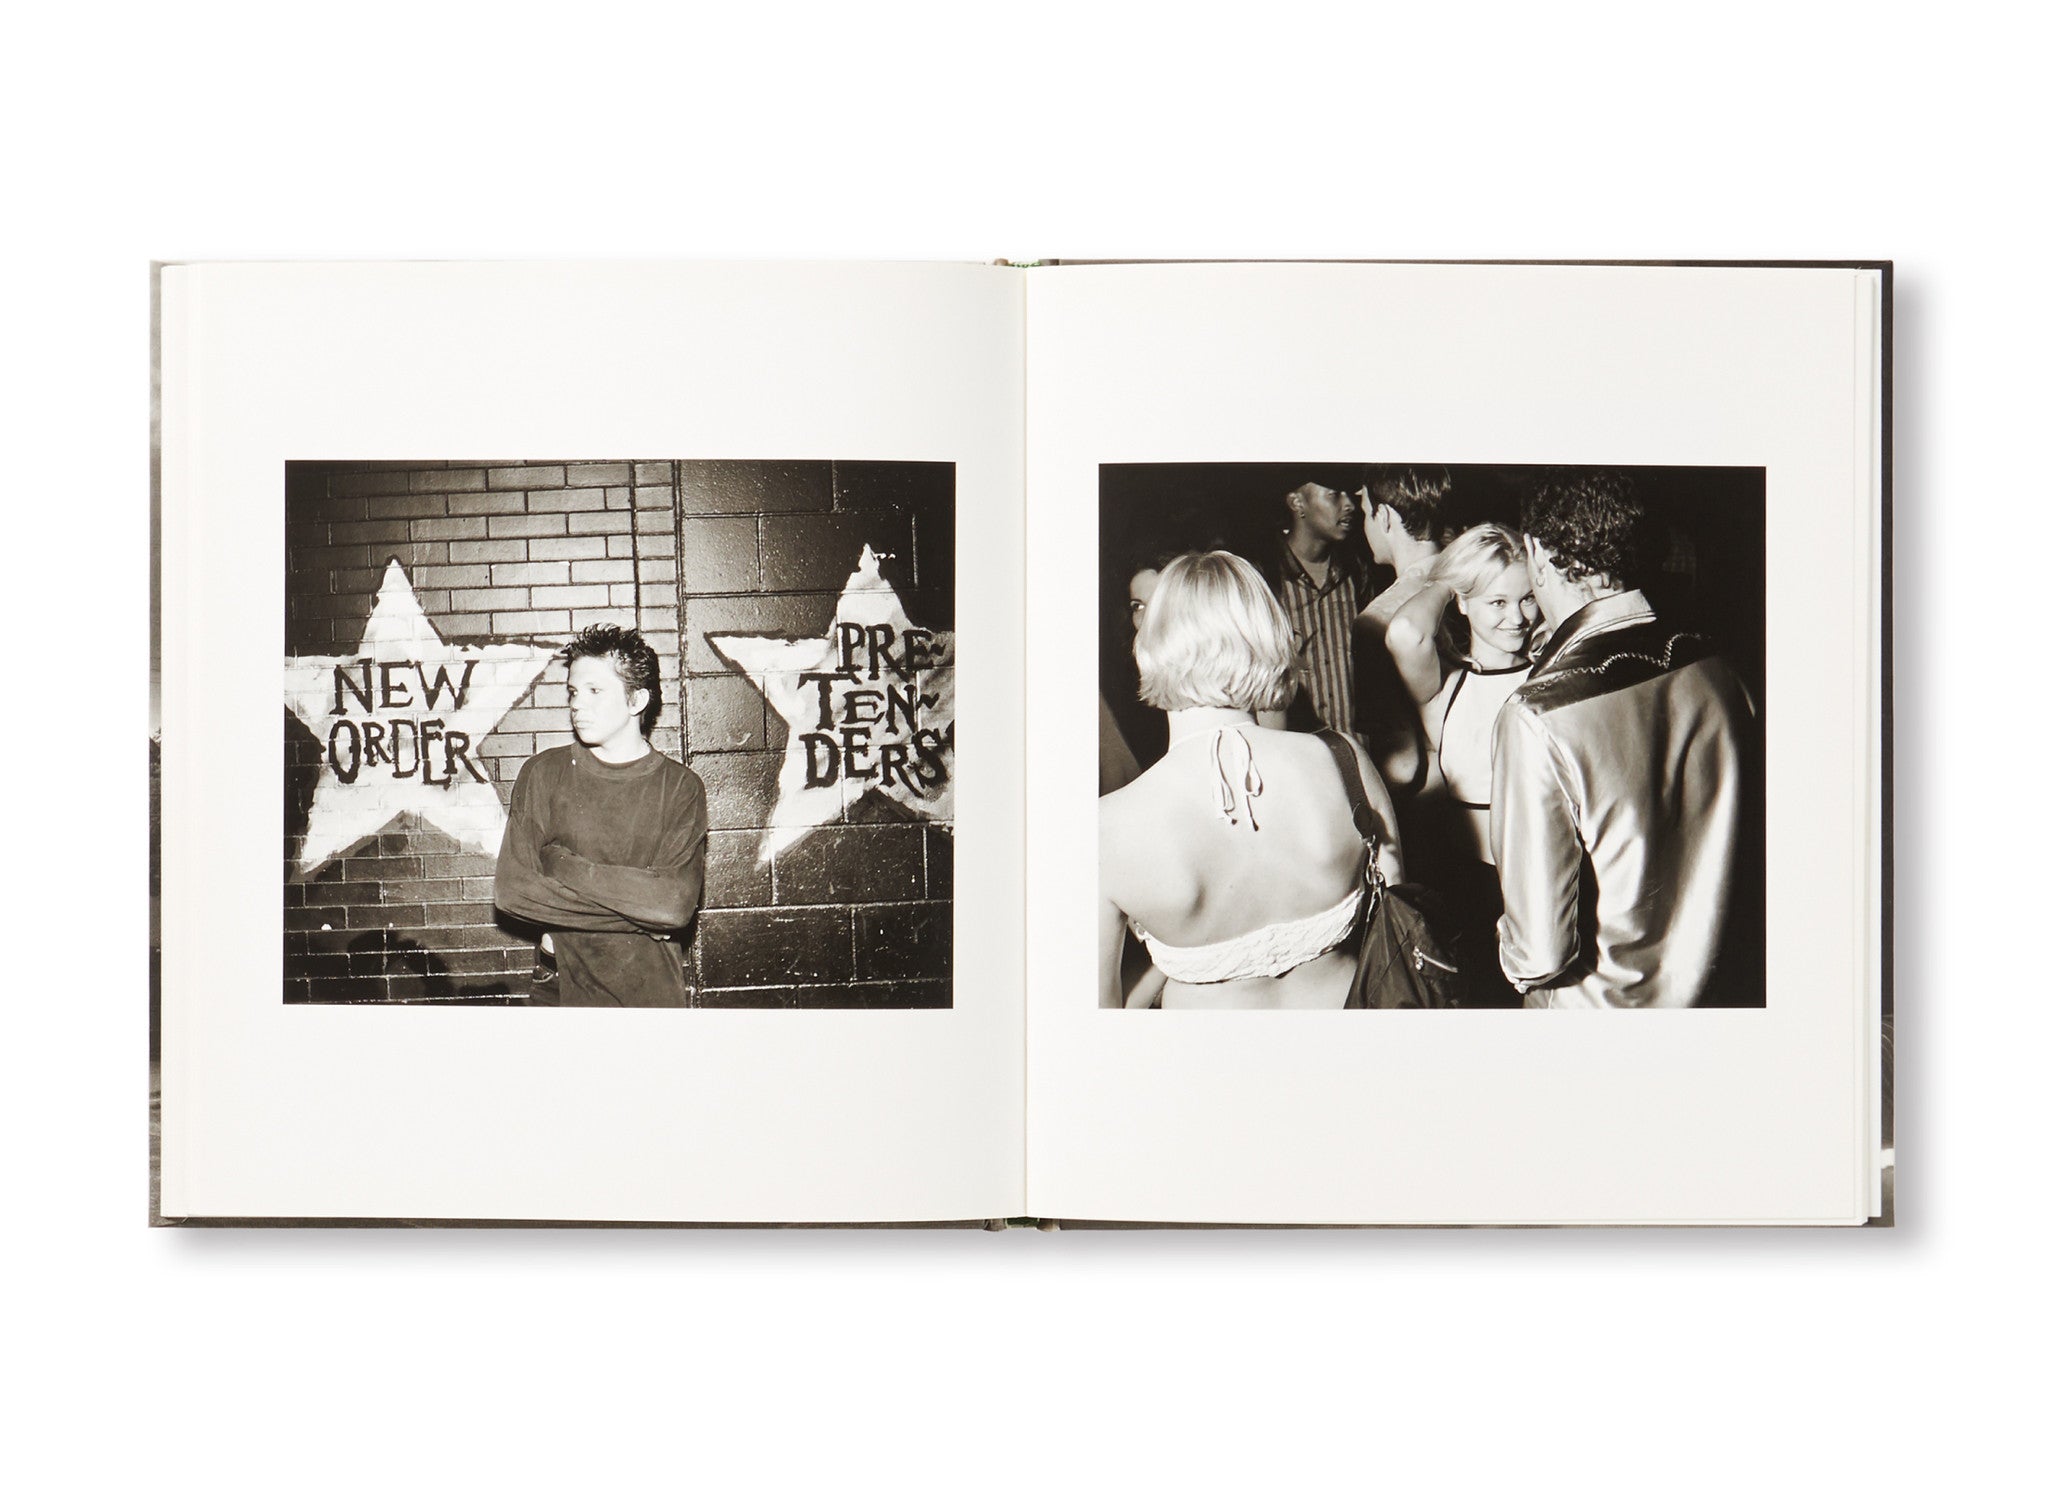 LOOKING FOR LOVE, 1996 by Alec Soth [SPECIAL EDITION]